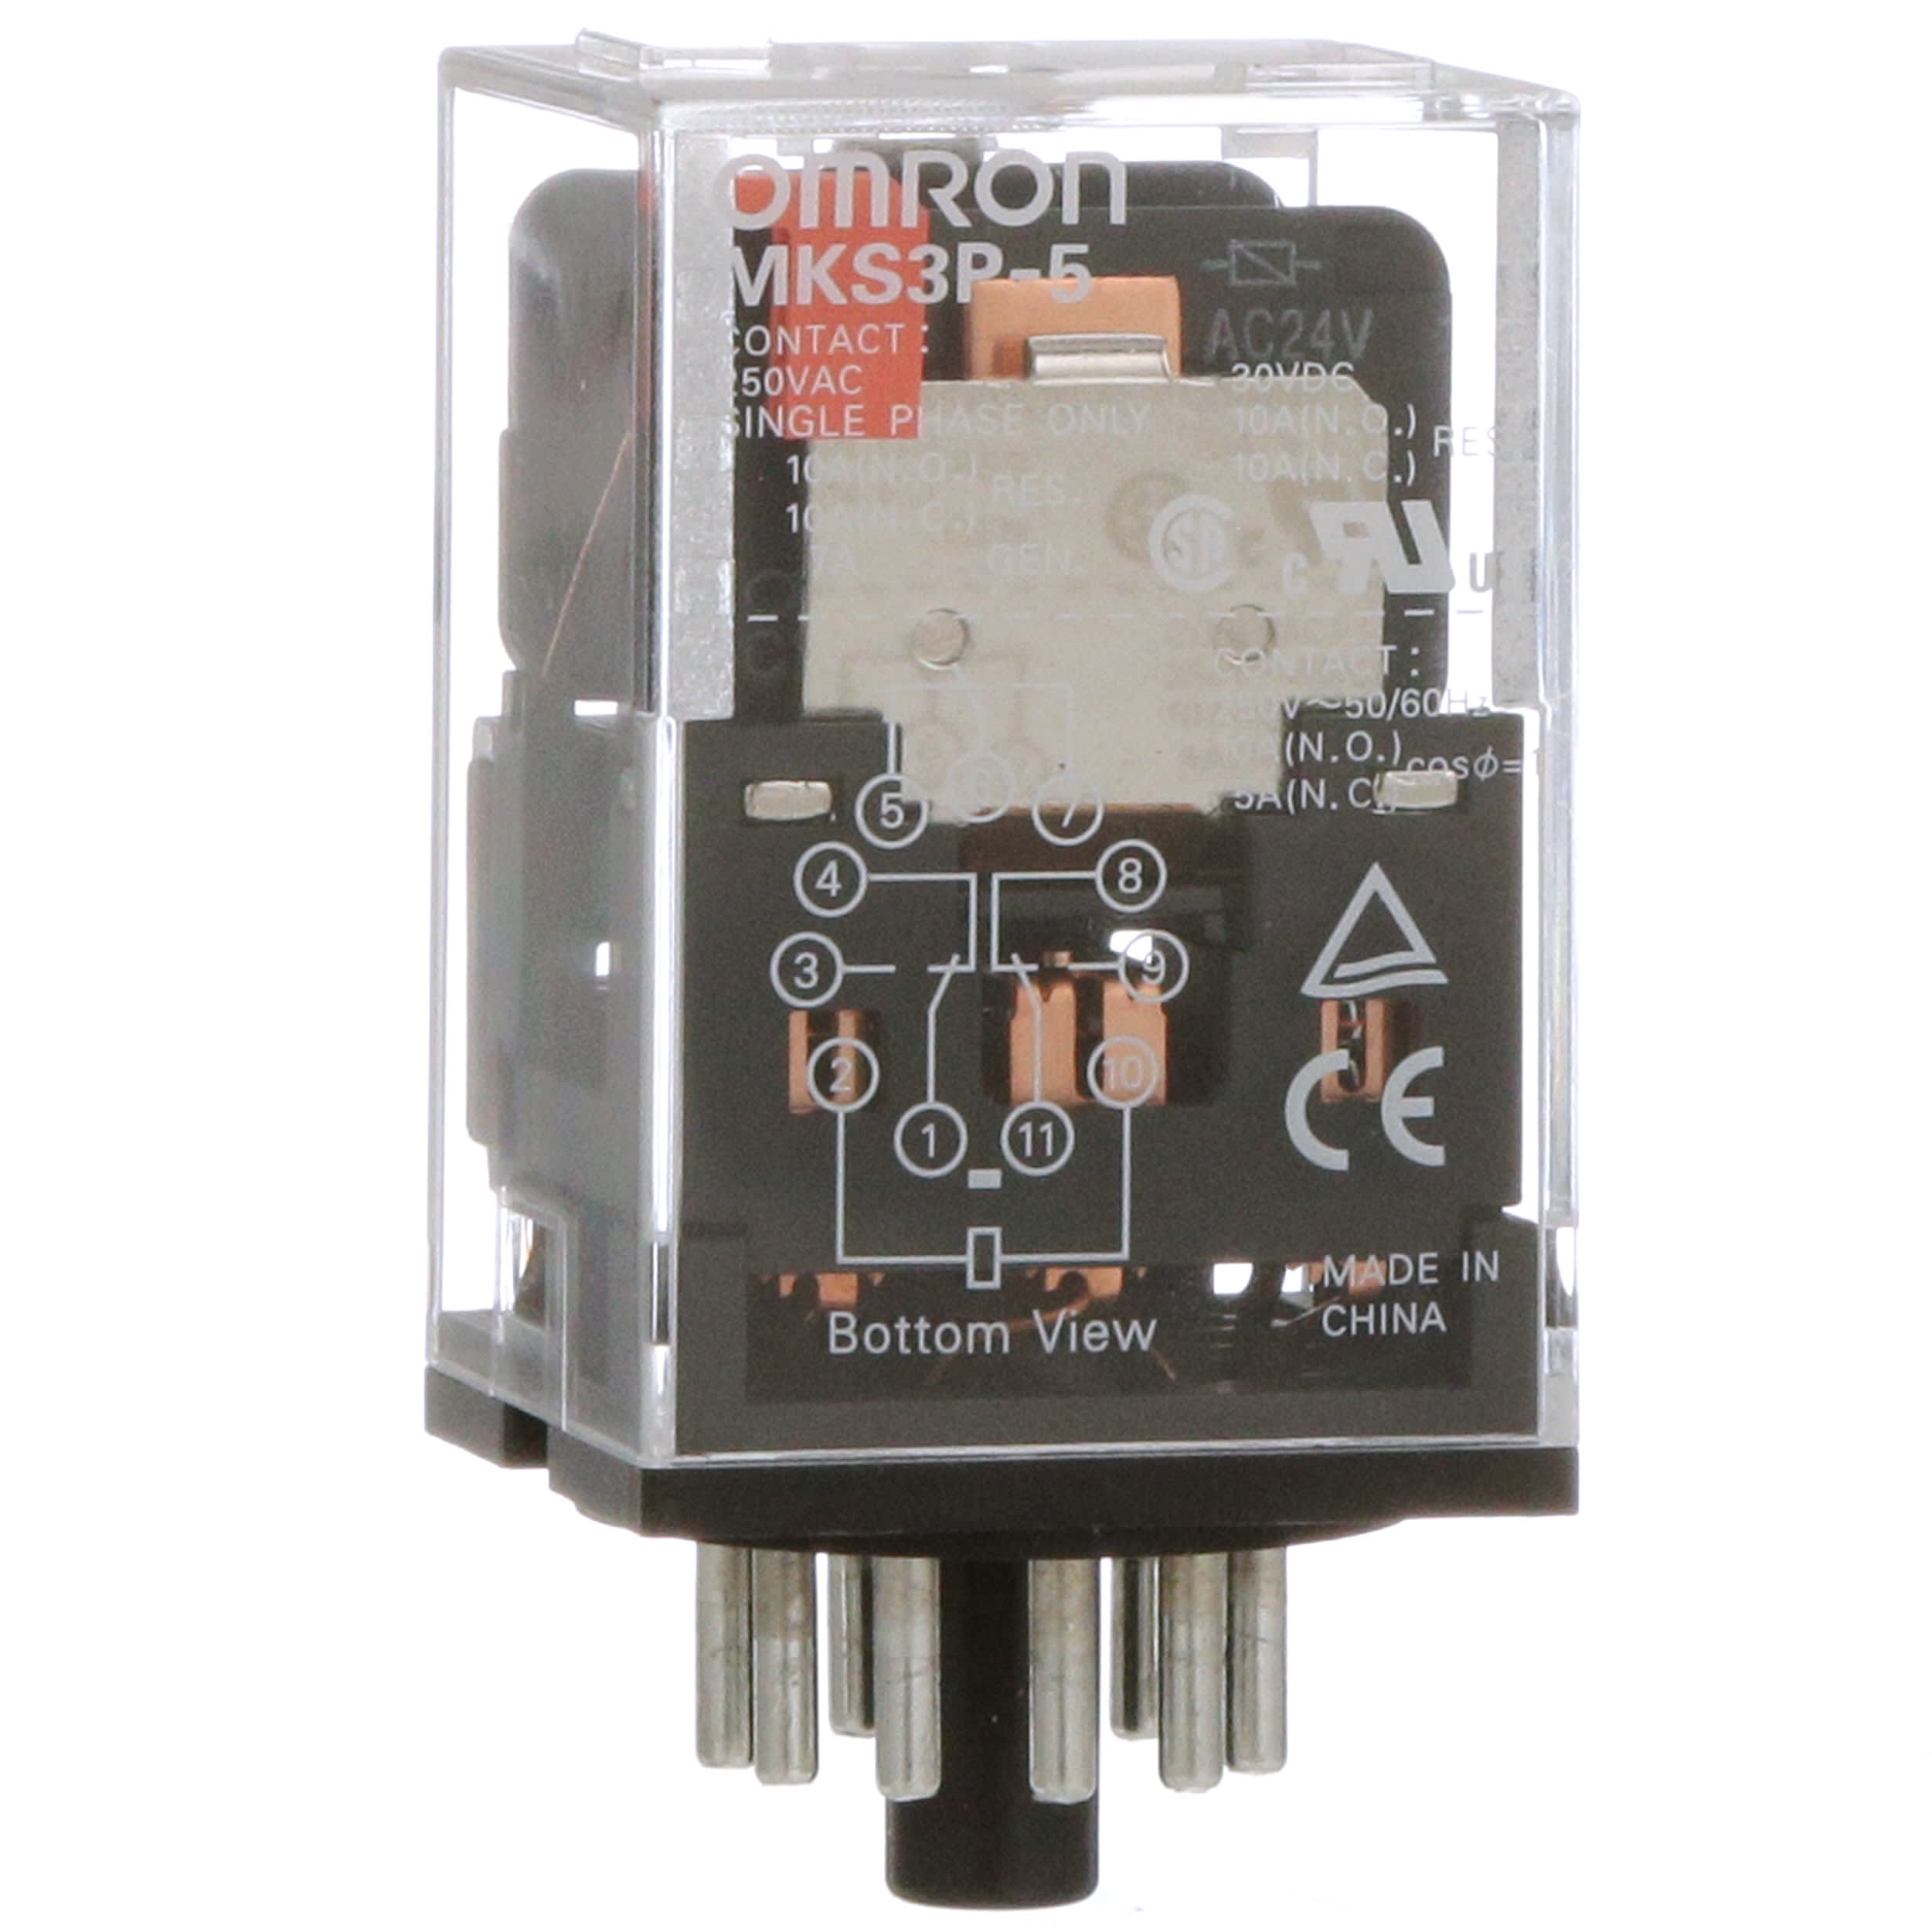 Omron MK3PN-5-S 24VAC Coil Volts Plug-In Relay DC Contact Rating Octal 